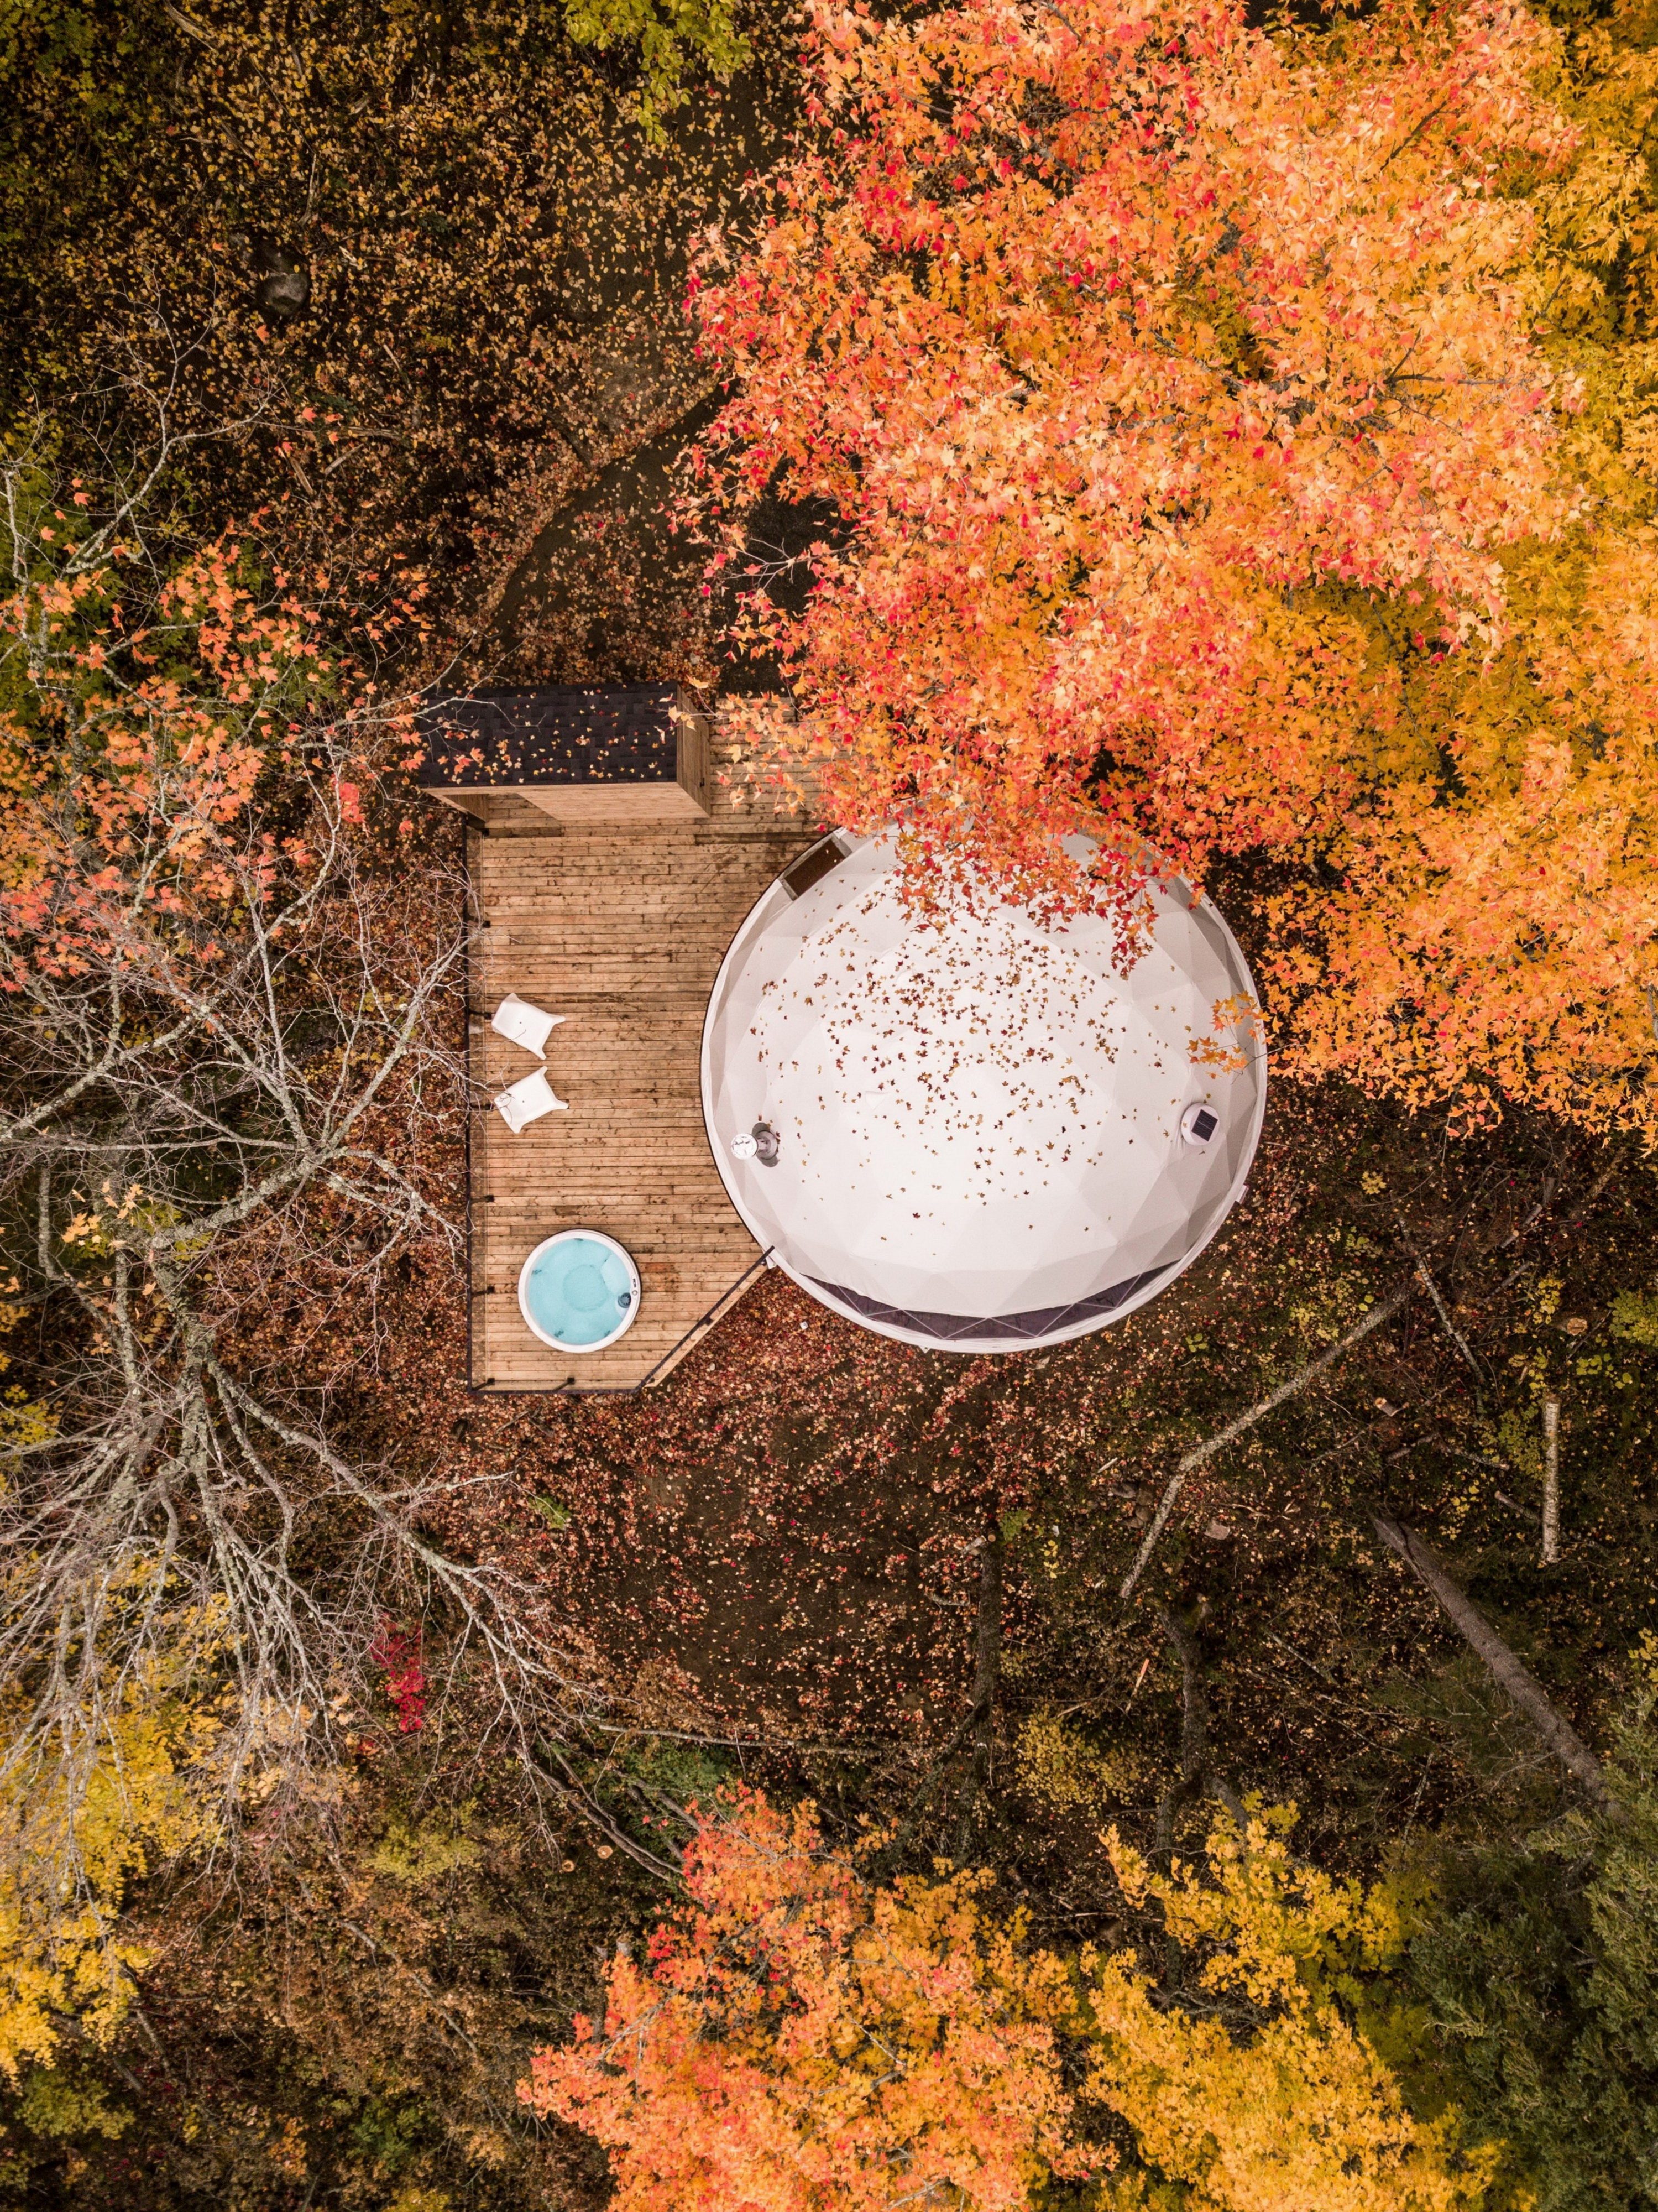 Dômes de Charlevoix – Glamping Domes in Quebec Forest